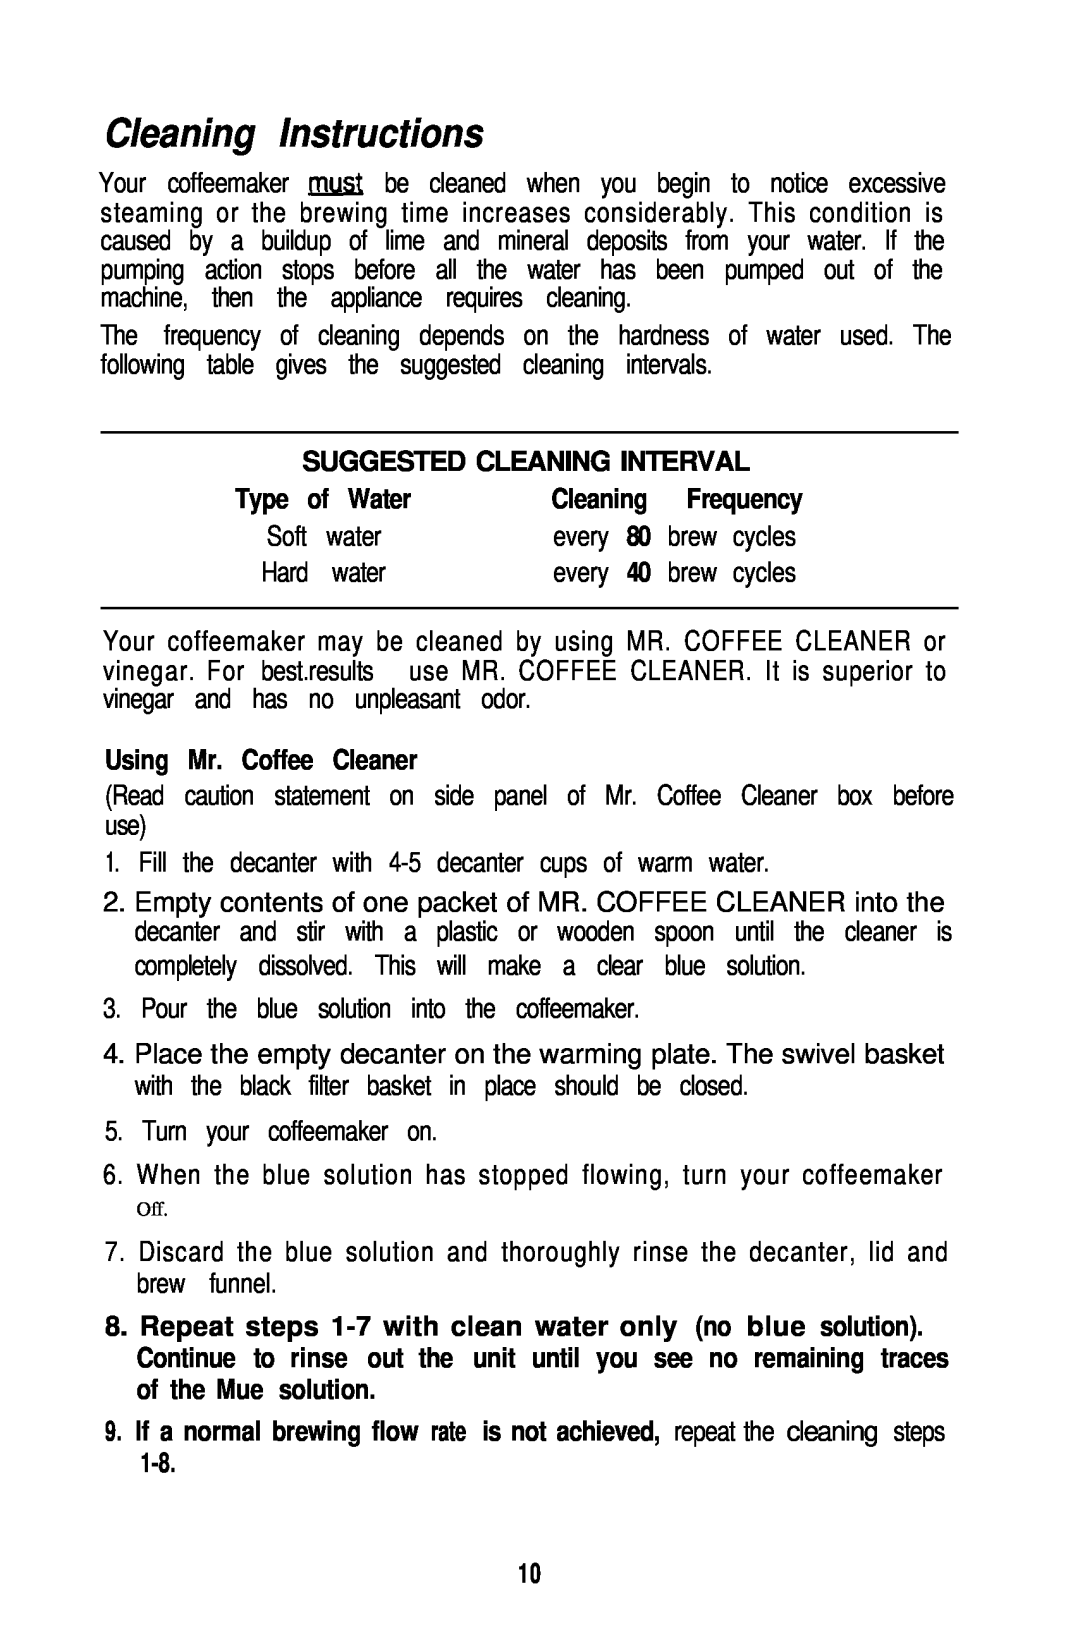 Mr. Coffee PR12A, PRX20 Cleaning Instructions, Suggested Cleaning Interval, Type of Water, Using Mr. Coffee Cleaner 